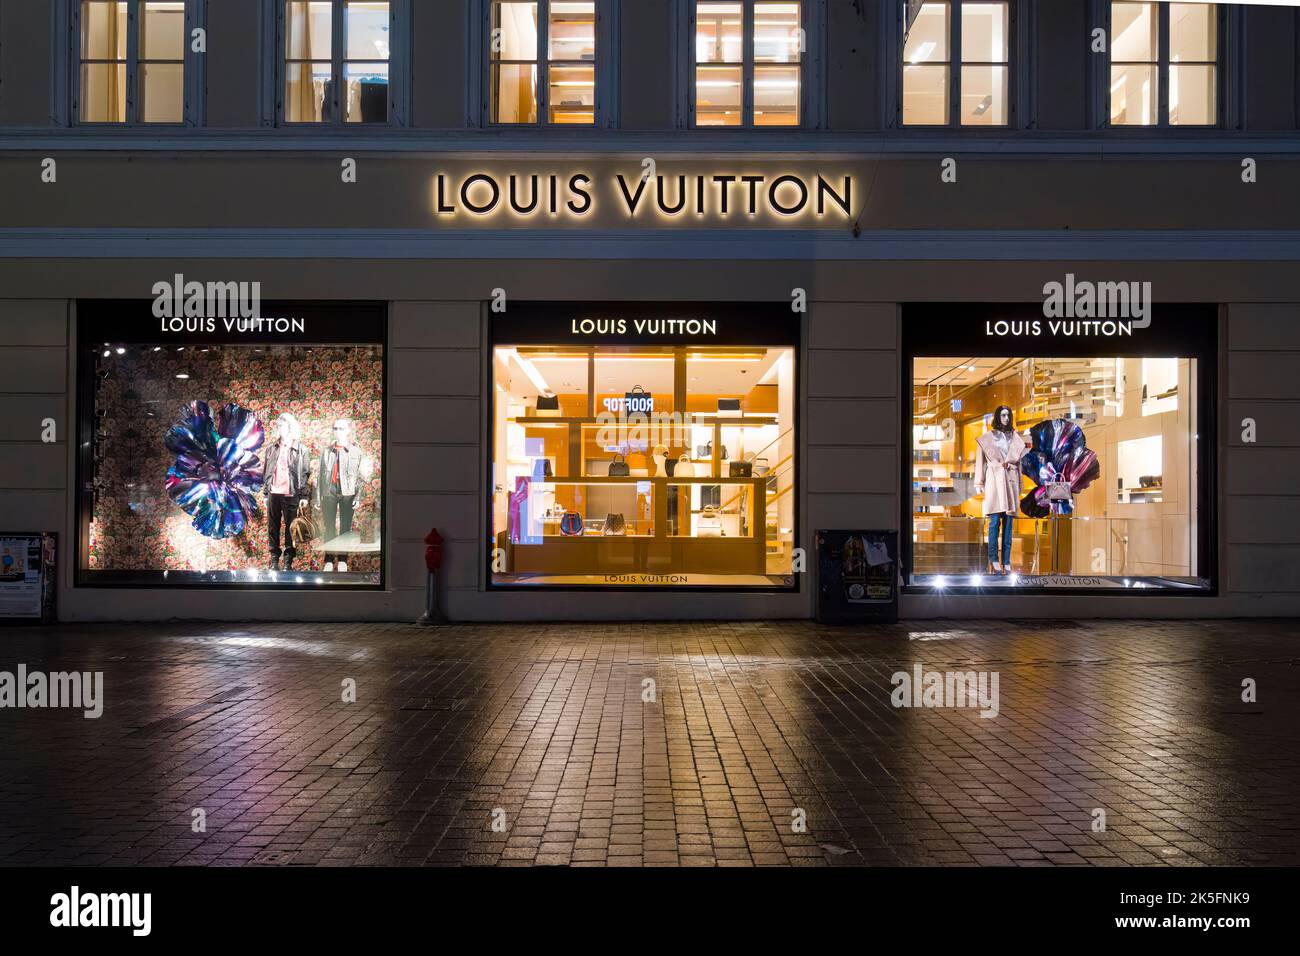 Louis Vuitton Outlet at Night, Dalian, China Editorial Image